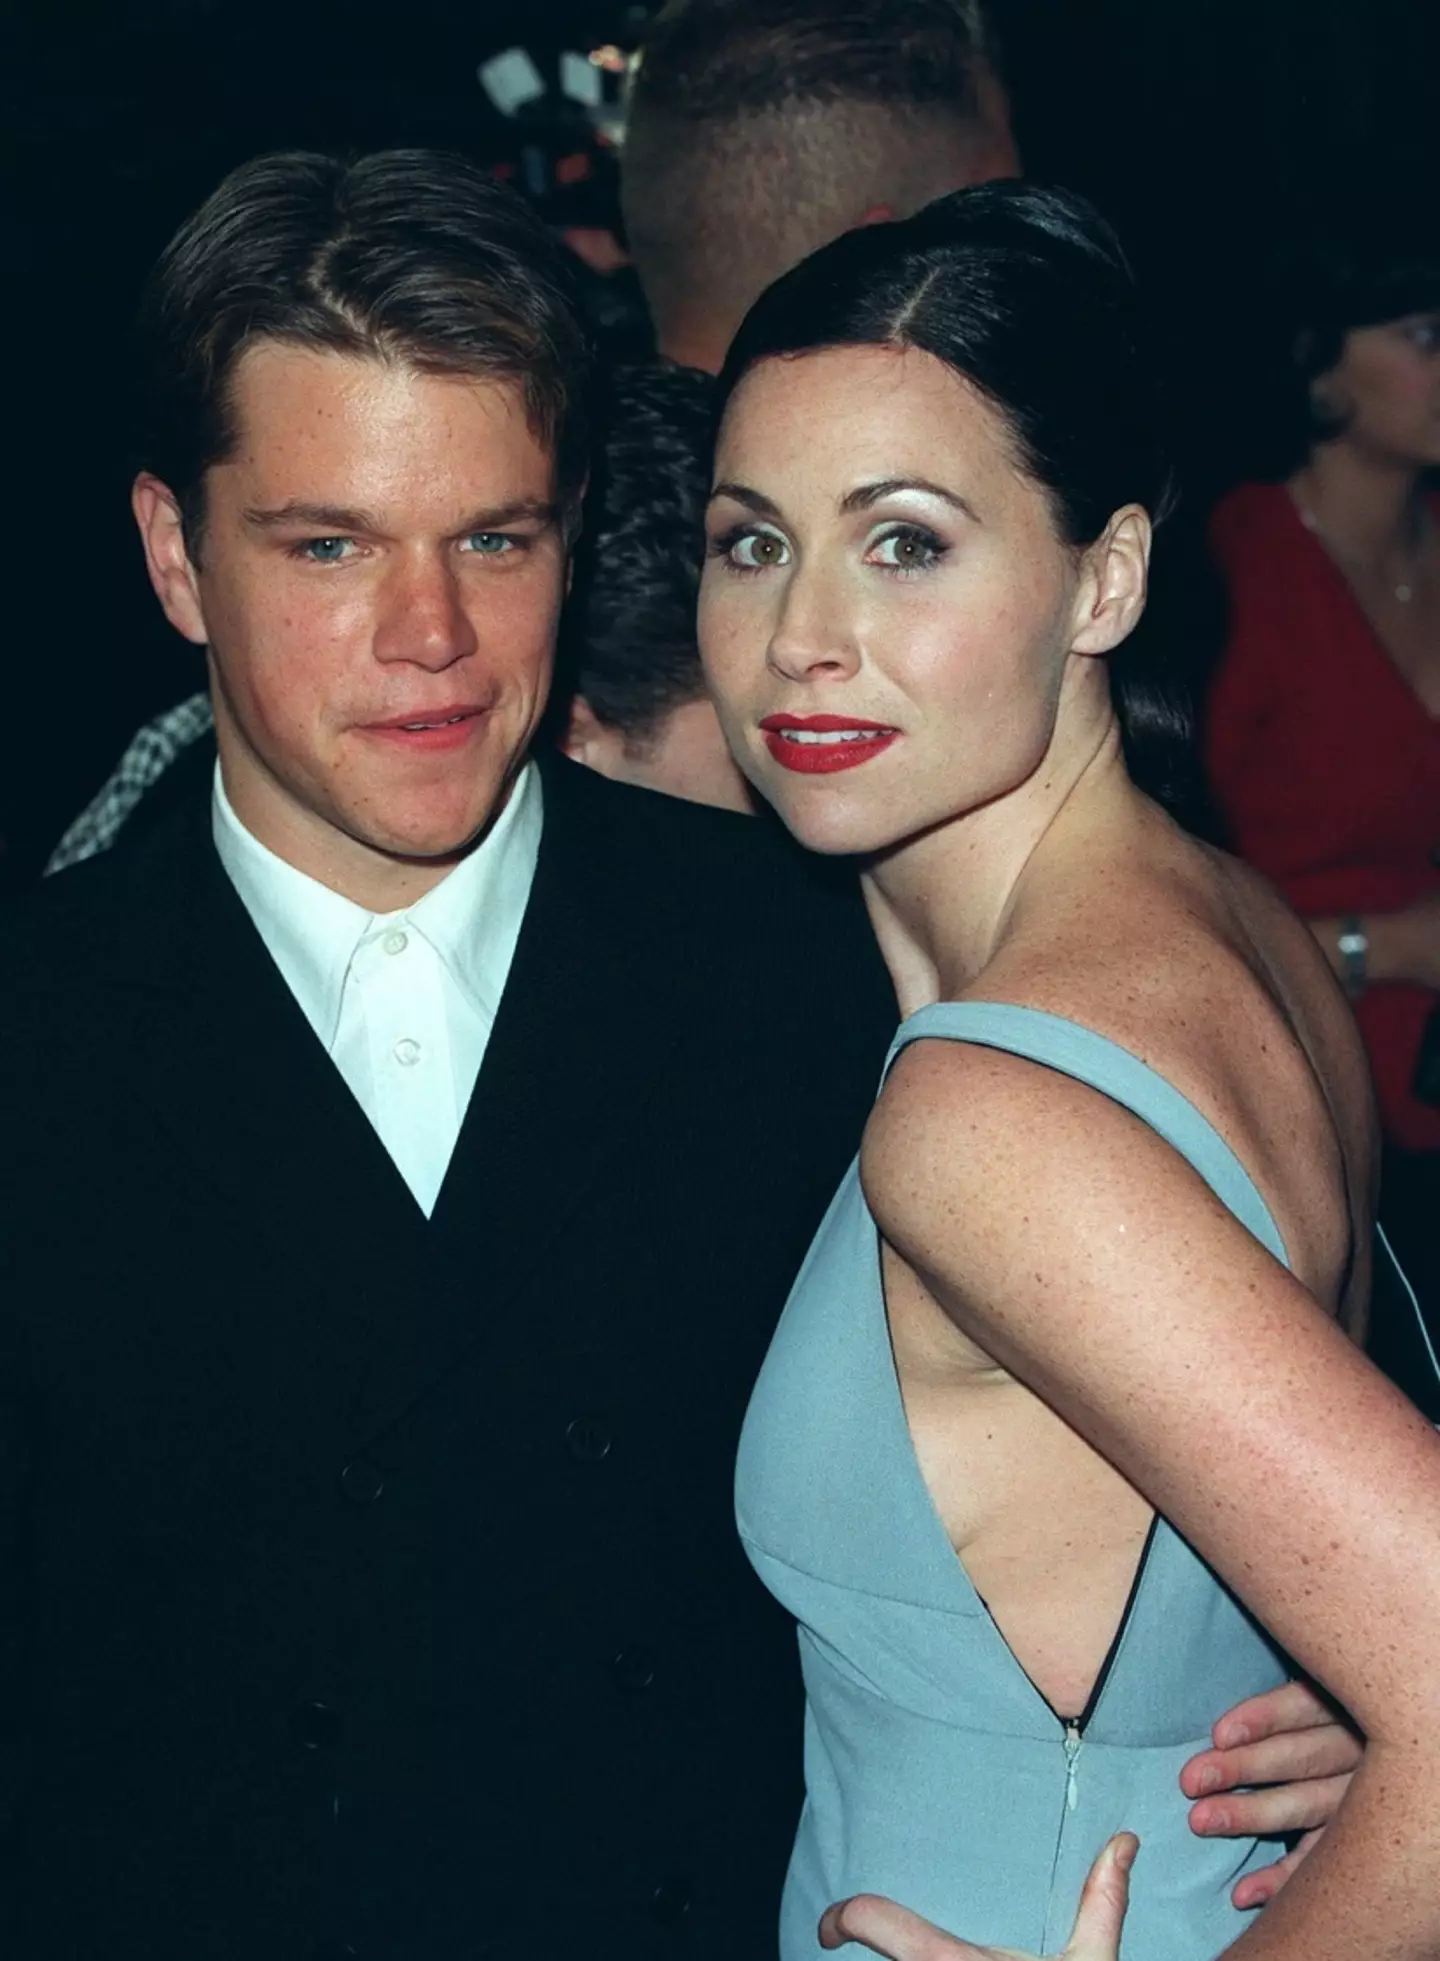 Minnie Driver and Matt Damon used to be an item after starring together in 1997's iconic Good Will Hunting.